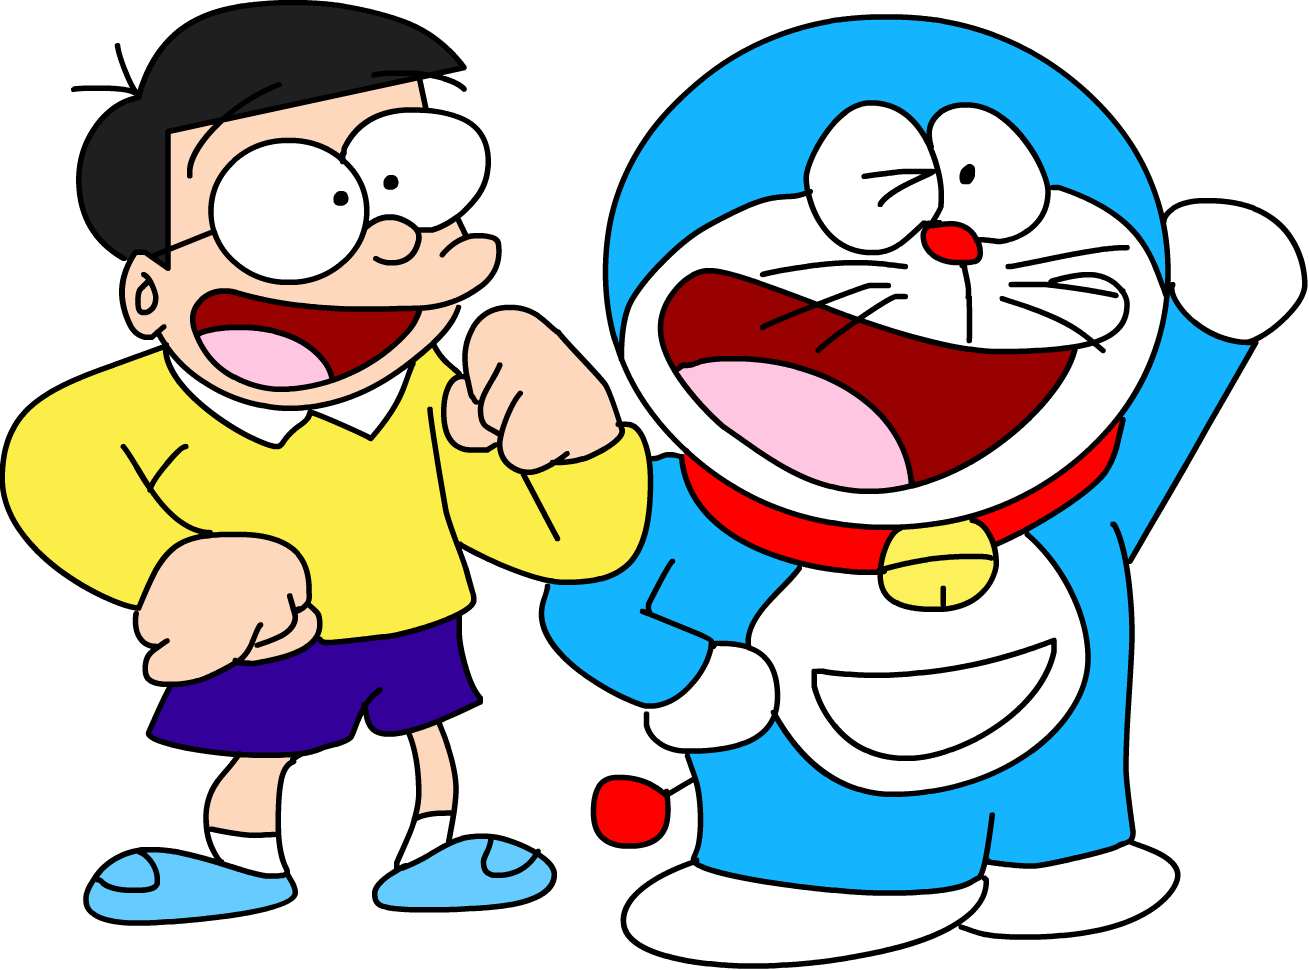 How to Draw Doraemon and Nobita Easy Step by Step || Doraemon Drawing | Art  drawings beautiful, Drawings, Cartoon